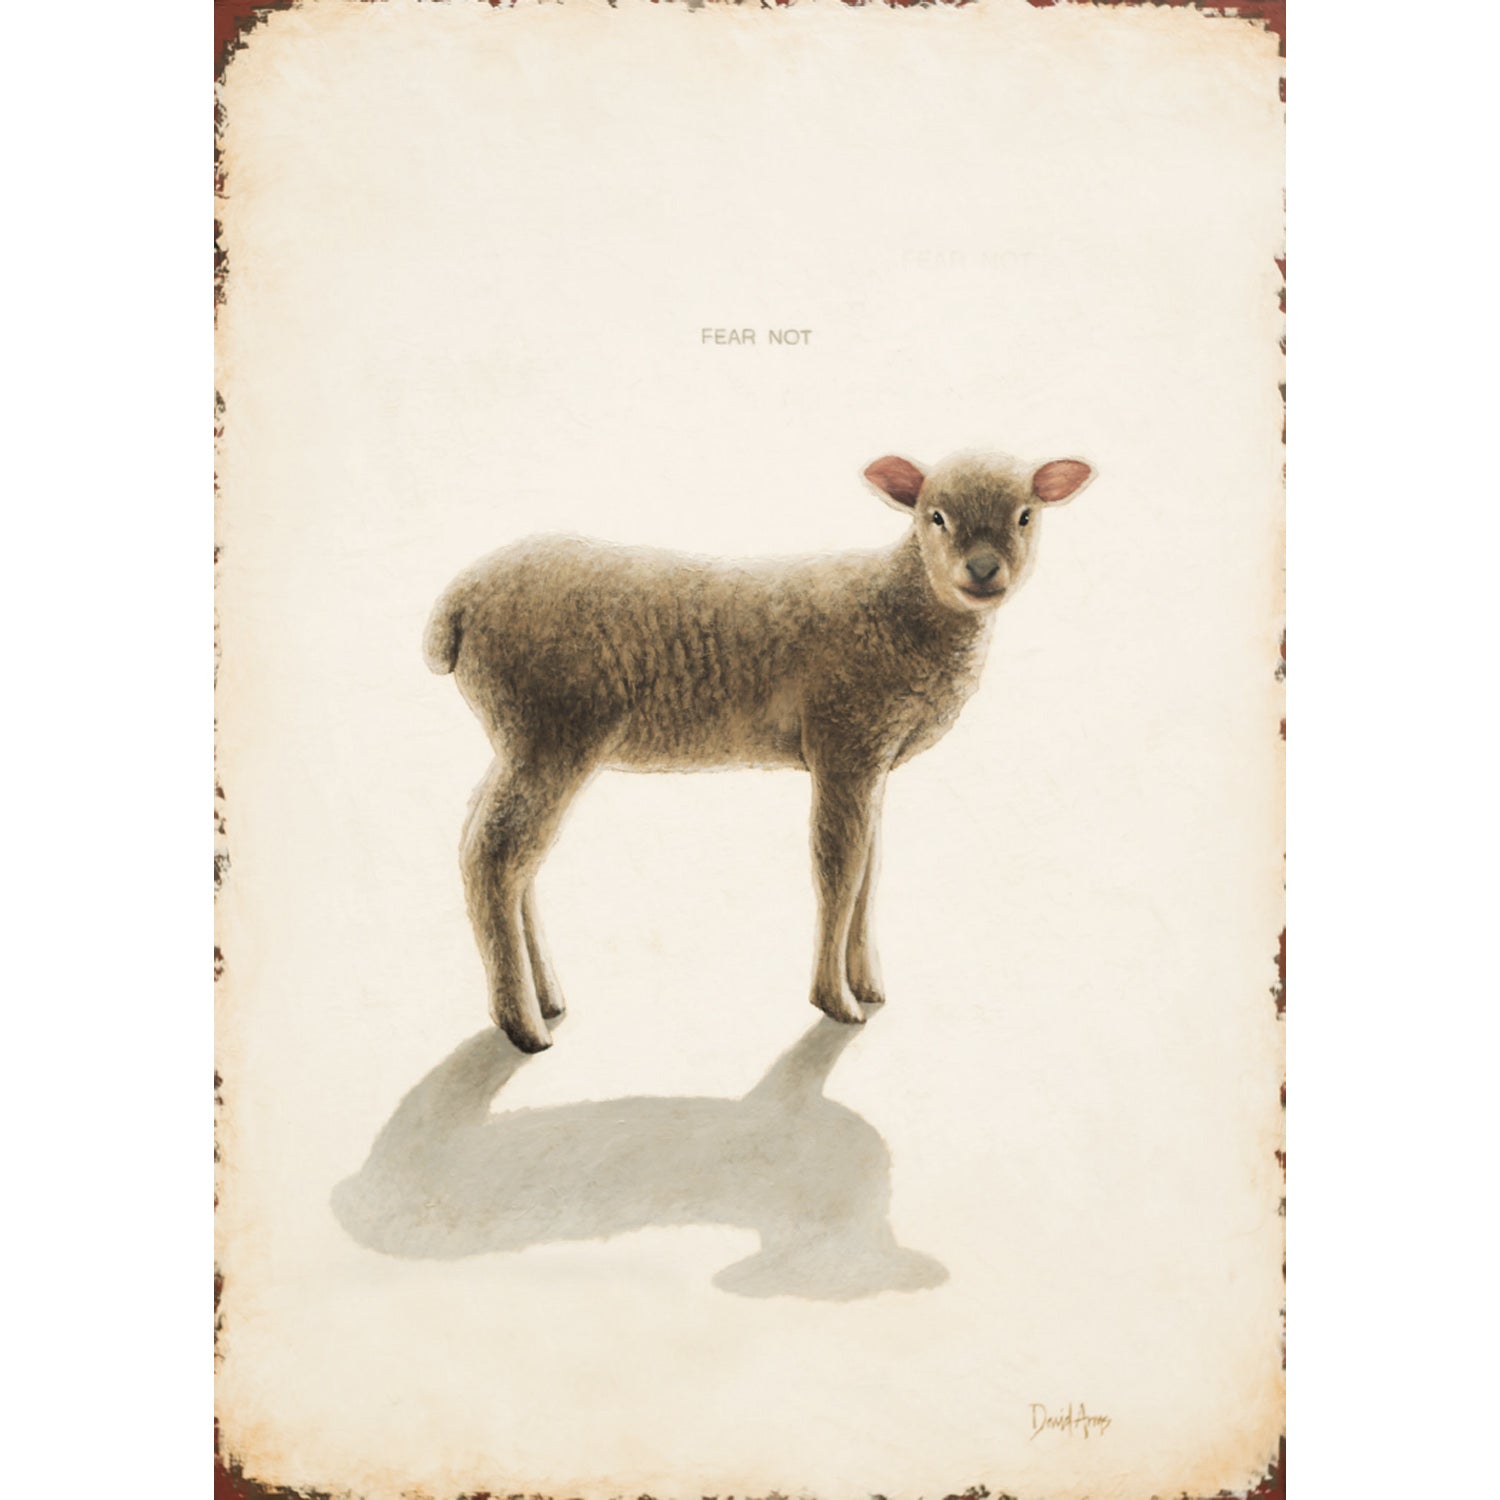 A Hester &amp; Cook Fear Not (Lamb) Card fear not standing in front of a shadow, symbolizing hope and healing in the world.